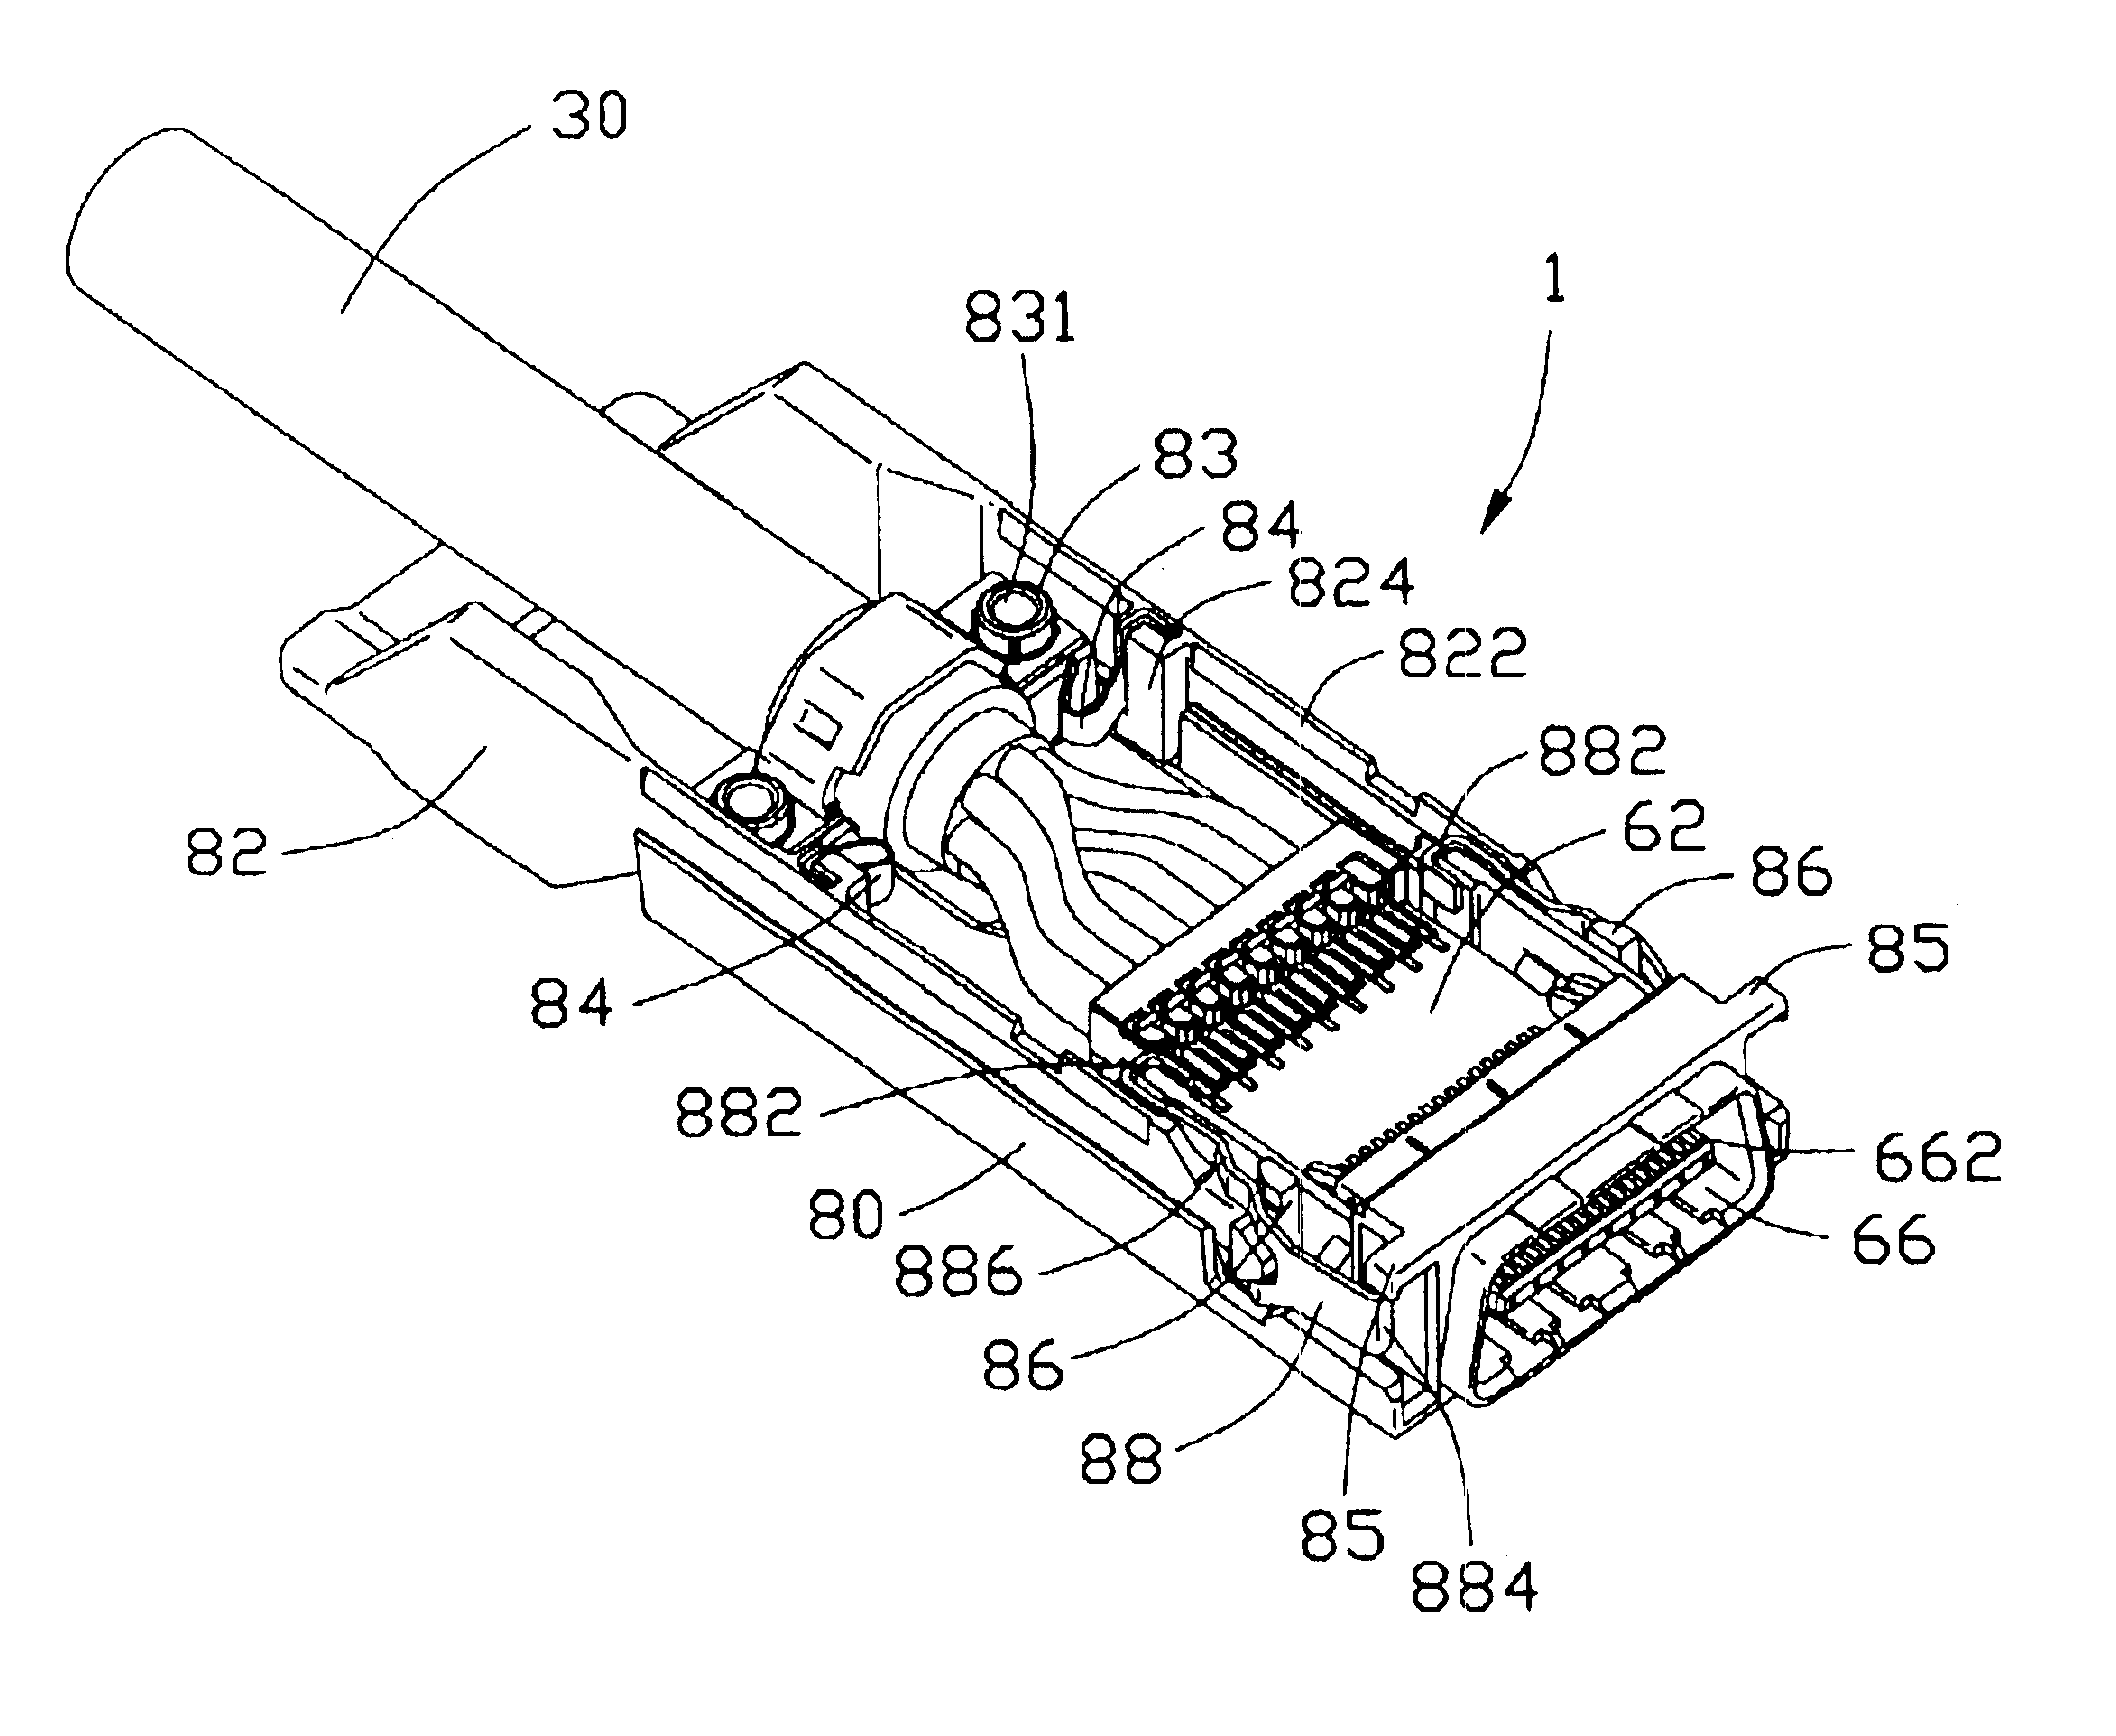 Cable connector having cross-talk suppressing feature and method for making the connector